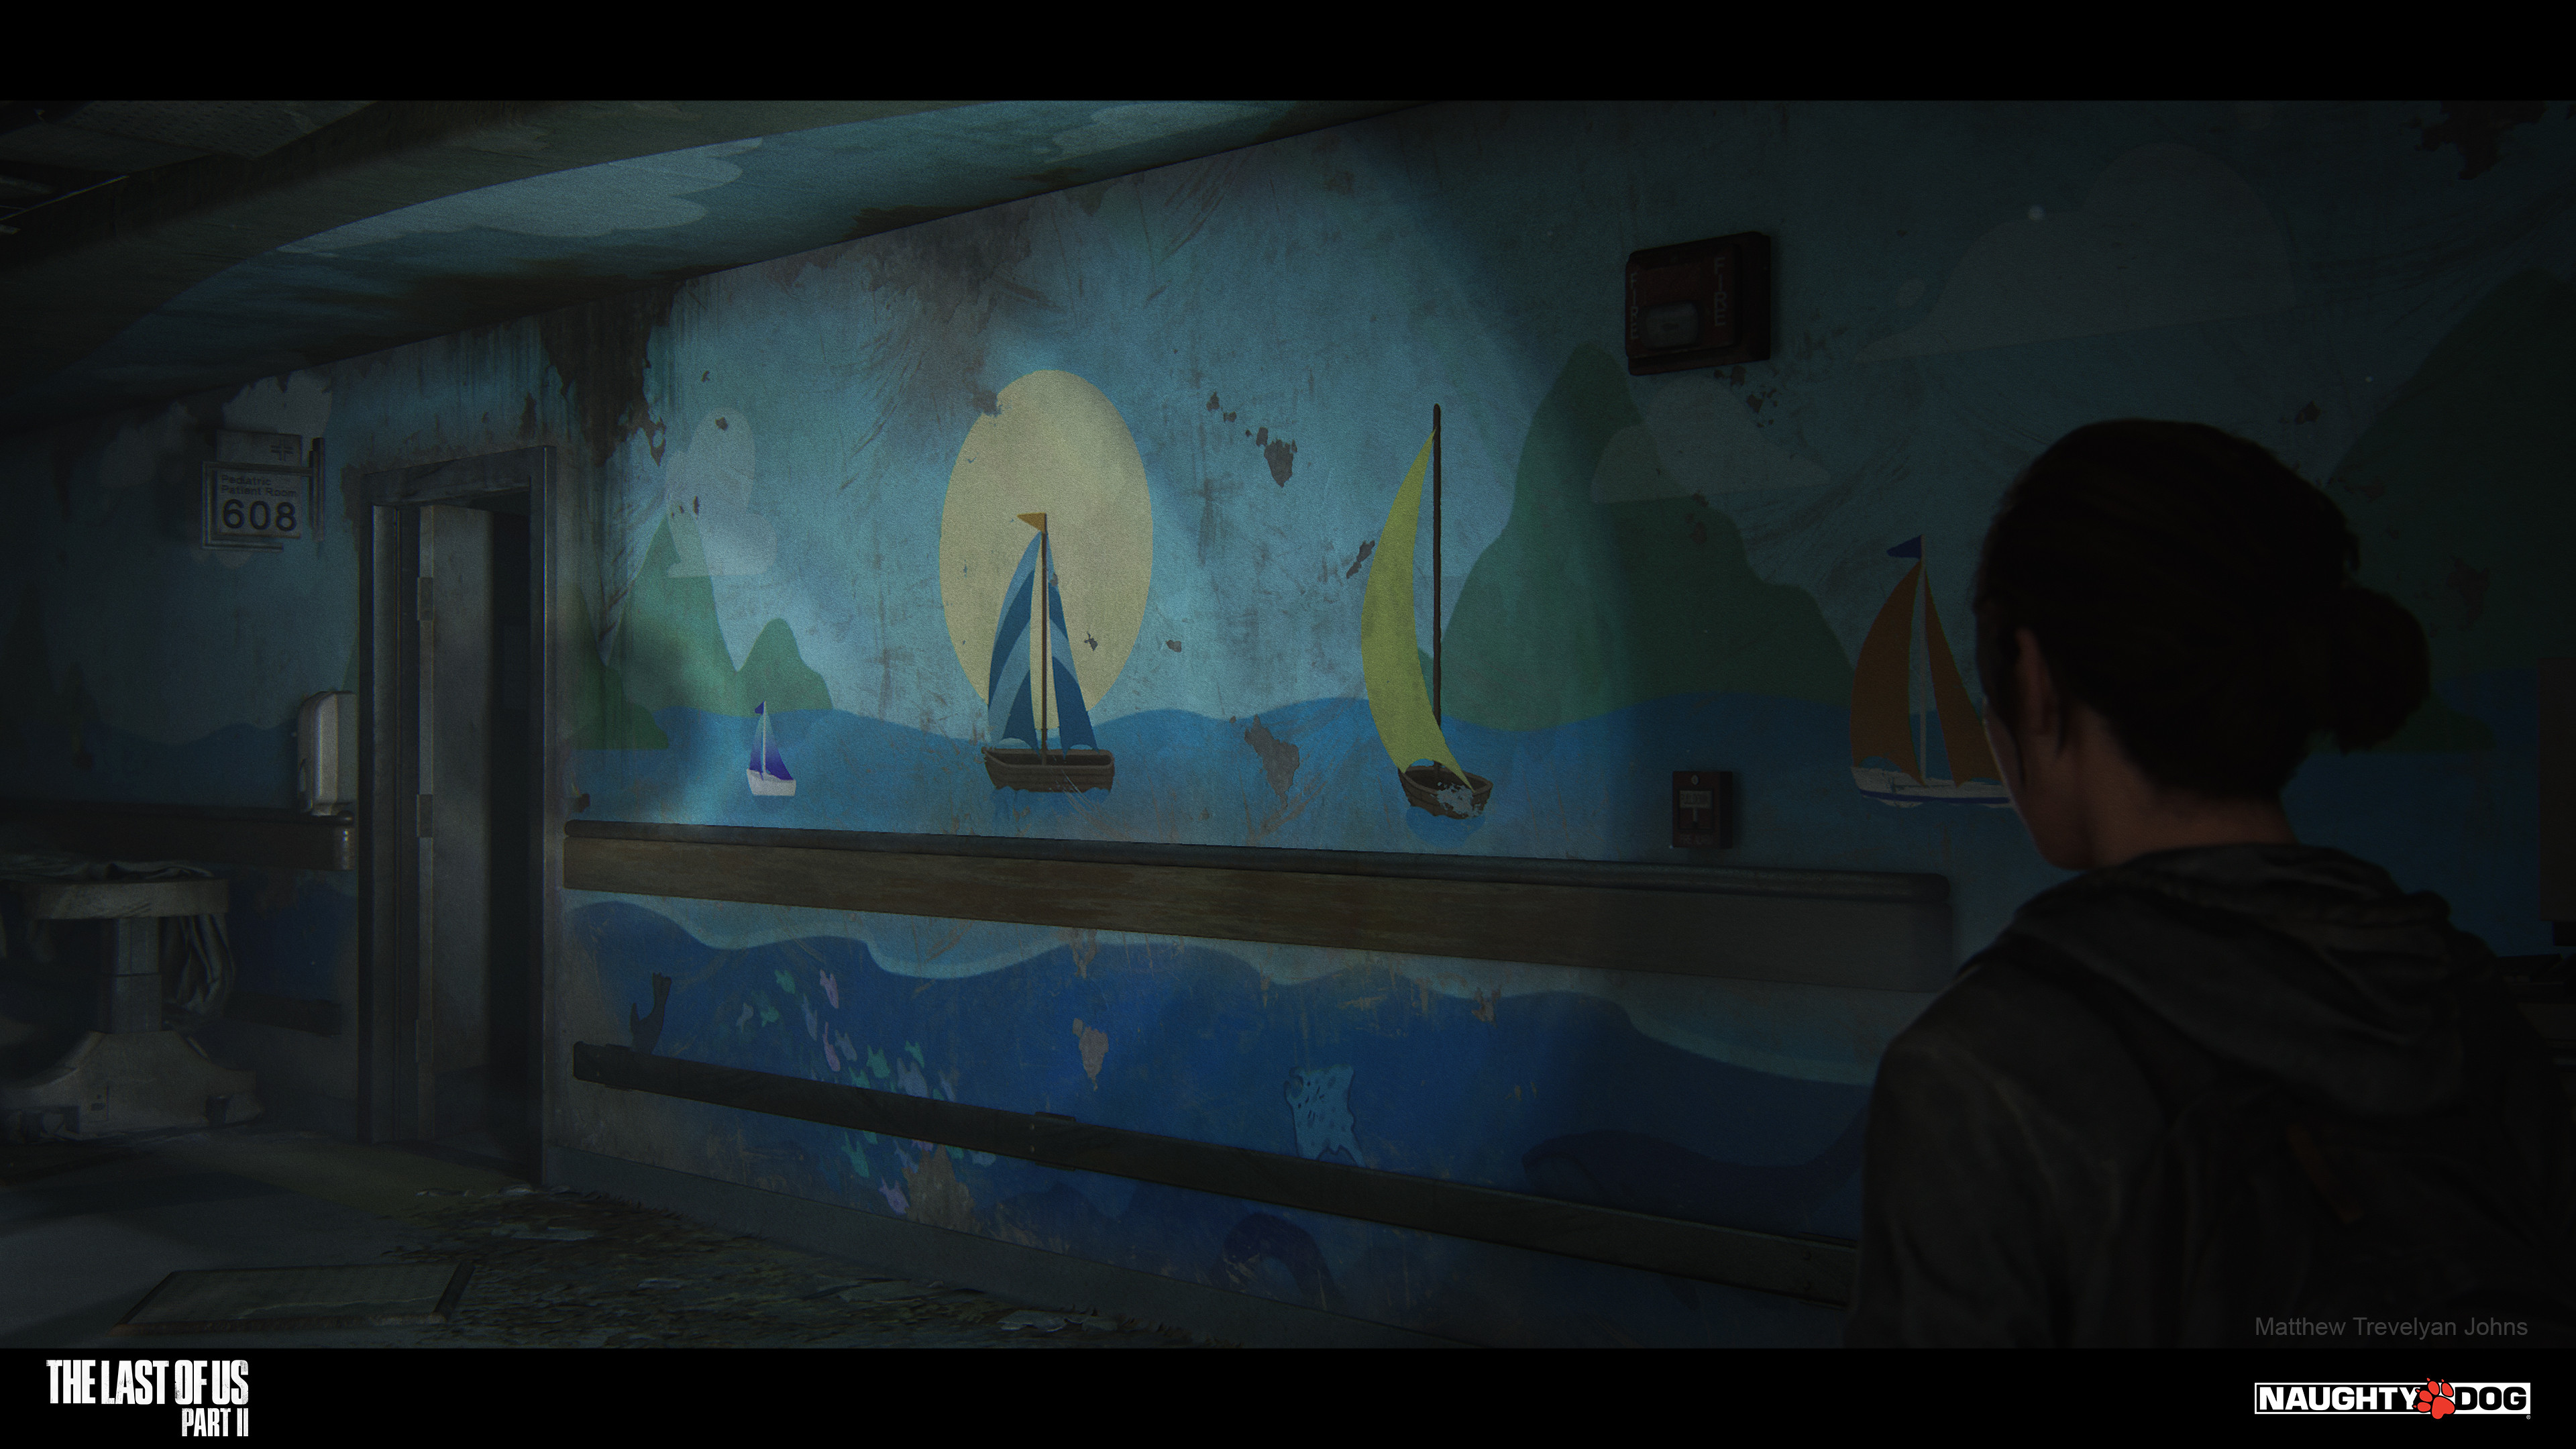 This mural spanned the entire length of the corridor and had completely unique placement of boats, sea life and clouds, the next image explains how this is achieved. Special thanks to McKenna Morison and Hailey Del Rio who provided the amazing 2D graphics